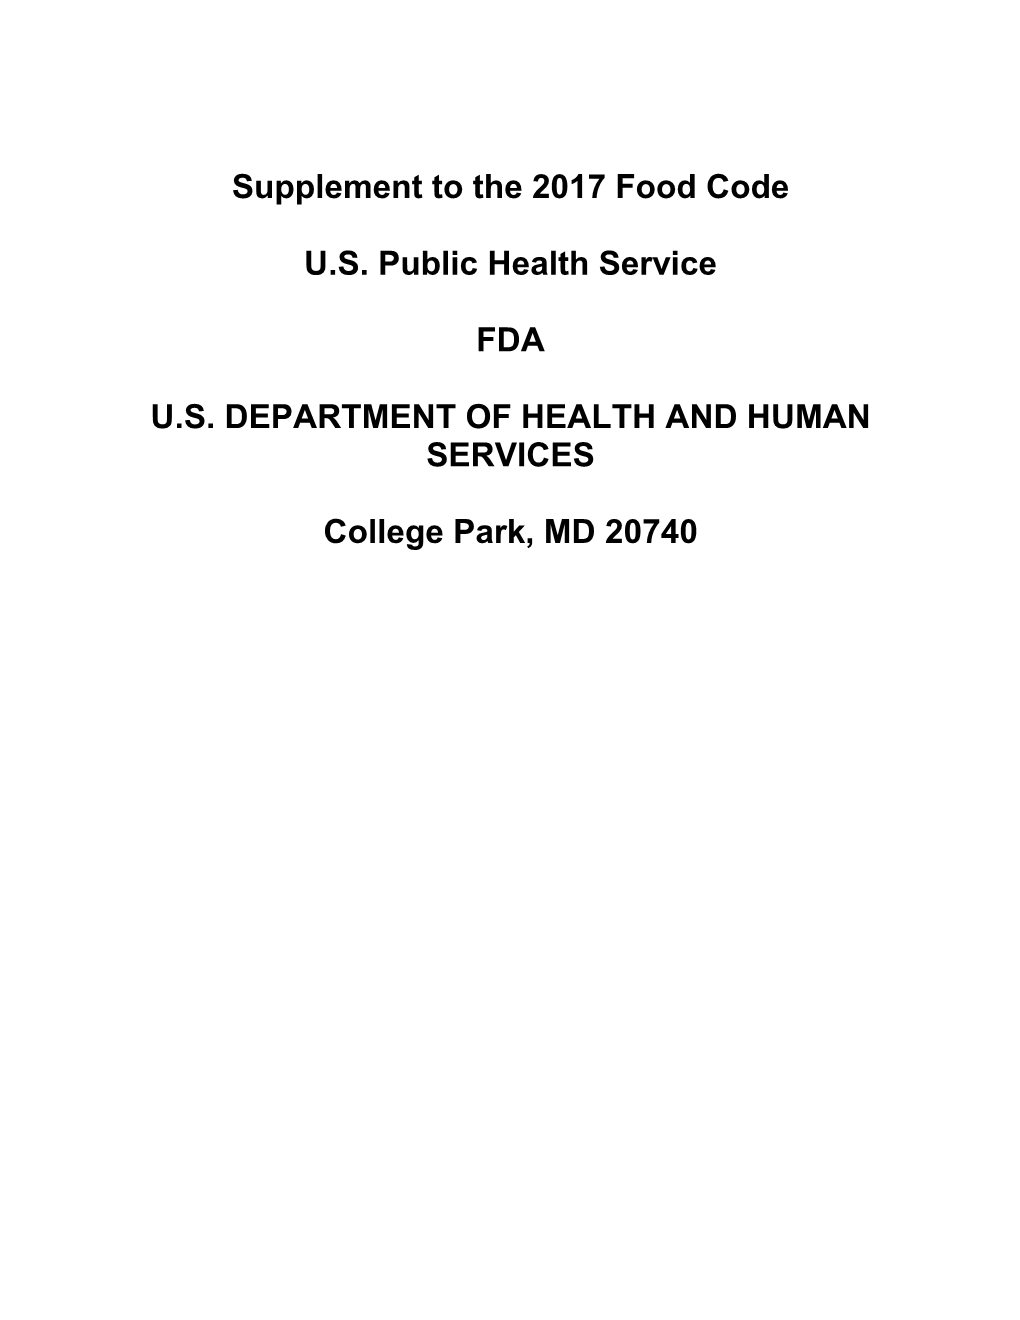 Supplement to the 2017 FDA Food Code